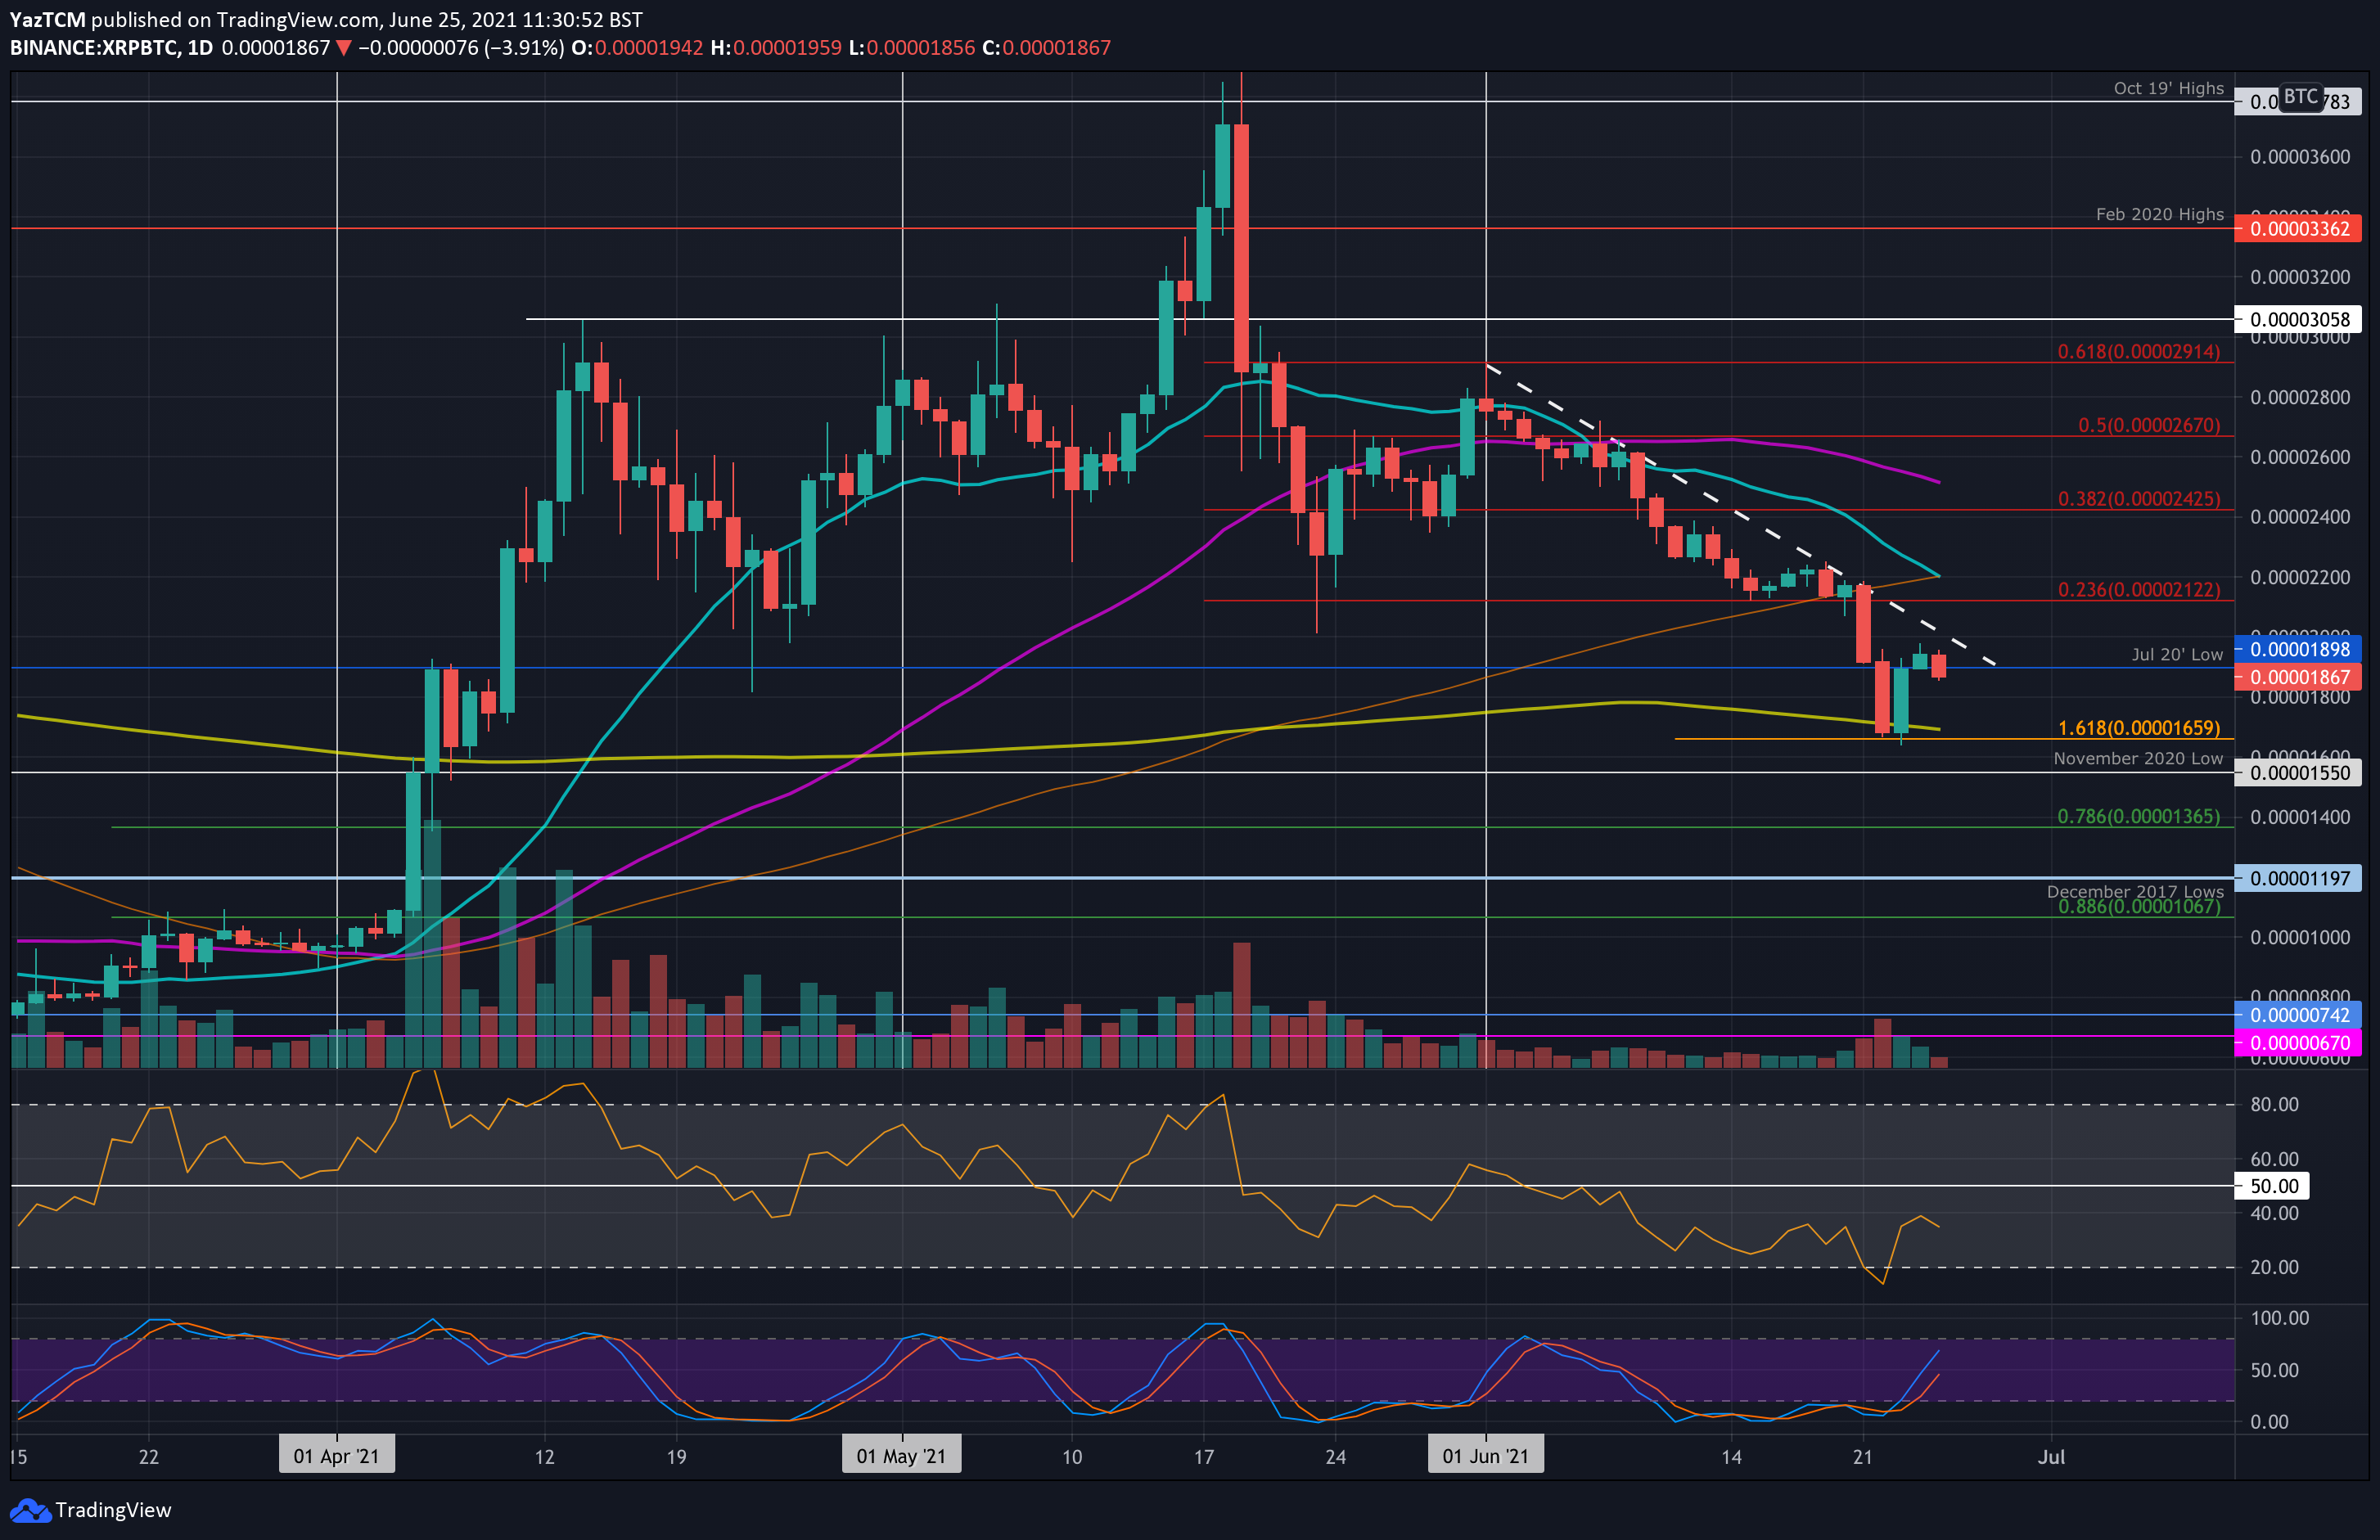 Crypto Price Analysis & Overview June 25th: Bitcoin, Ethereum, Ripple, Cardano, and Polkadot